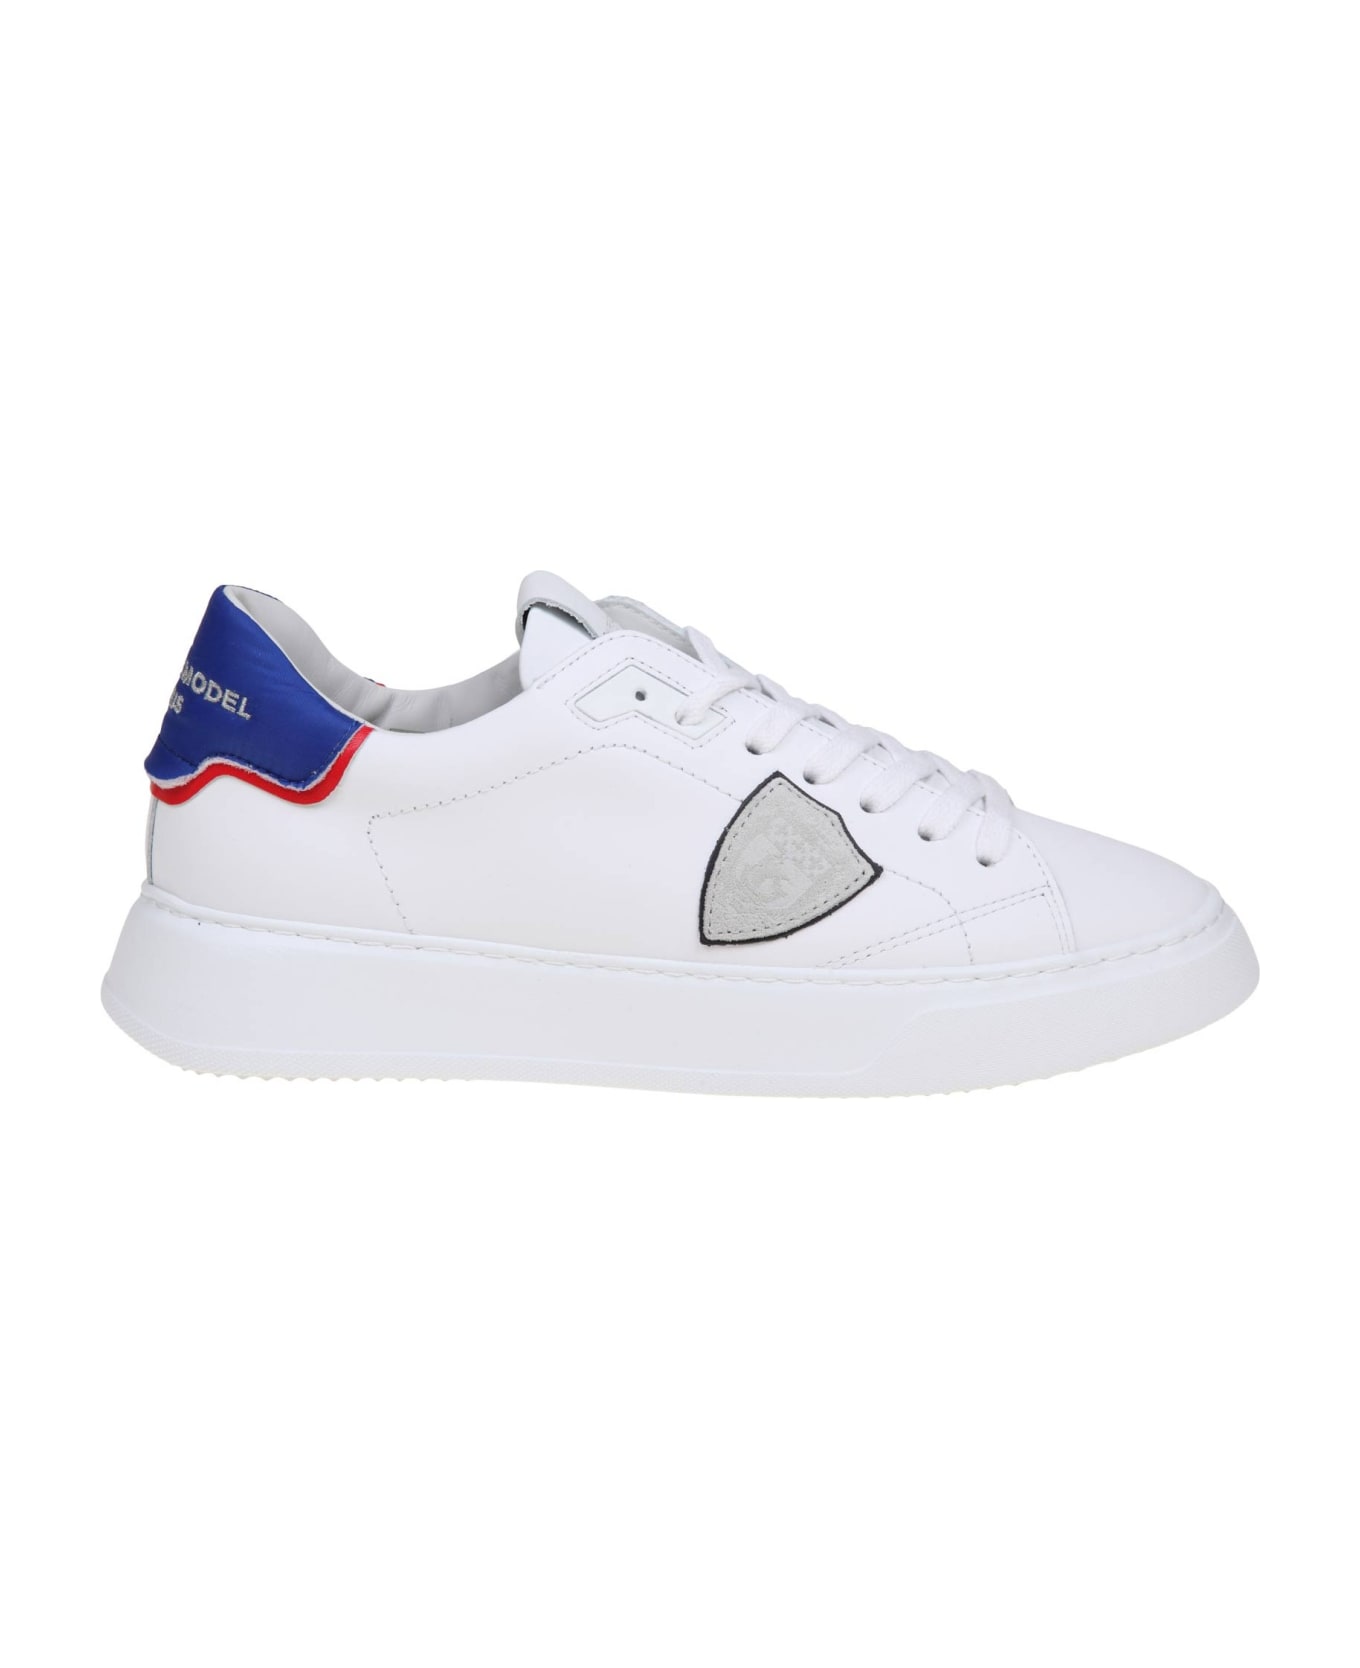 Philippe Model Temple Low Sneakers In White And Blue Leather - WHITE/BLUETTE